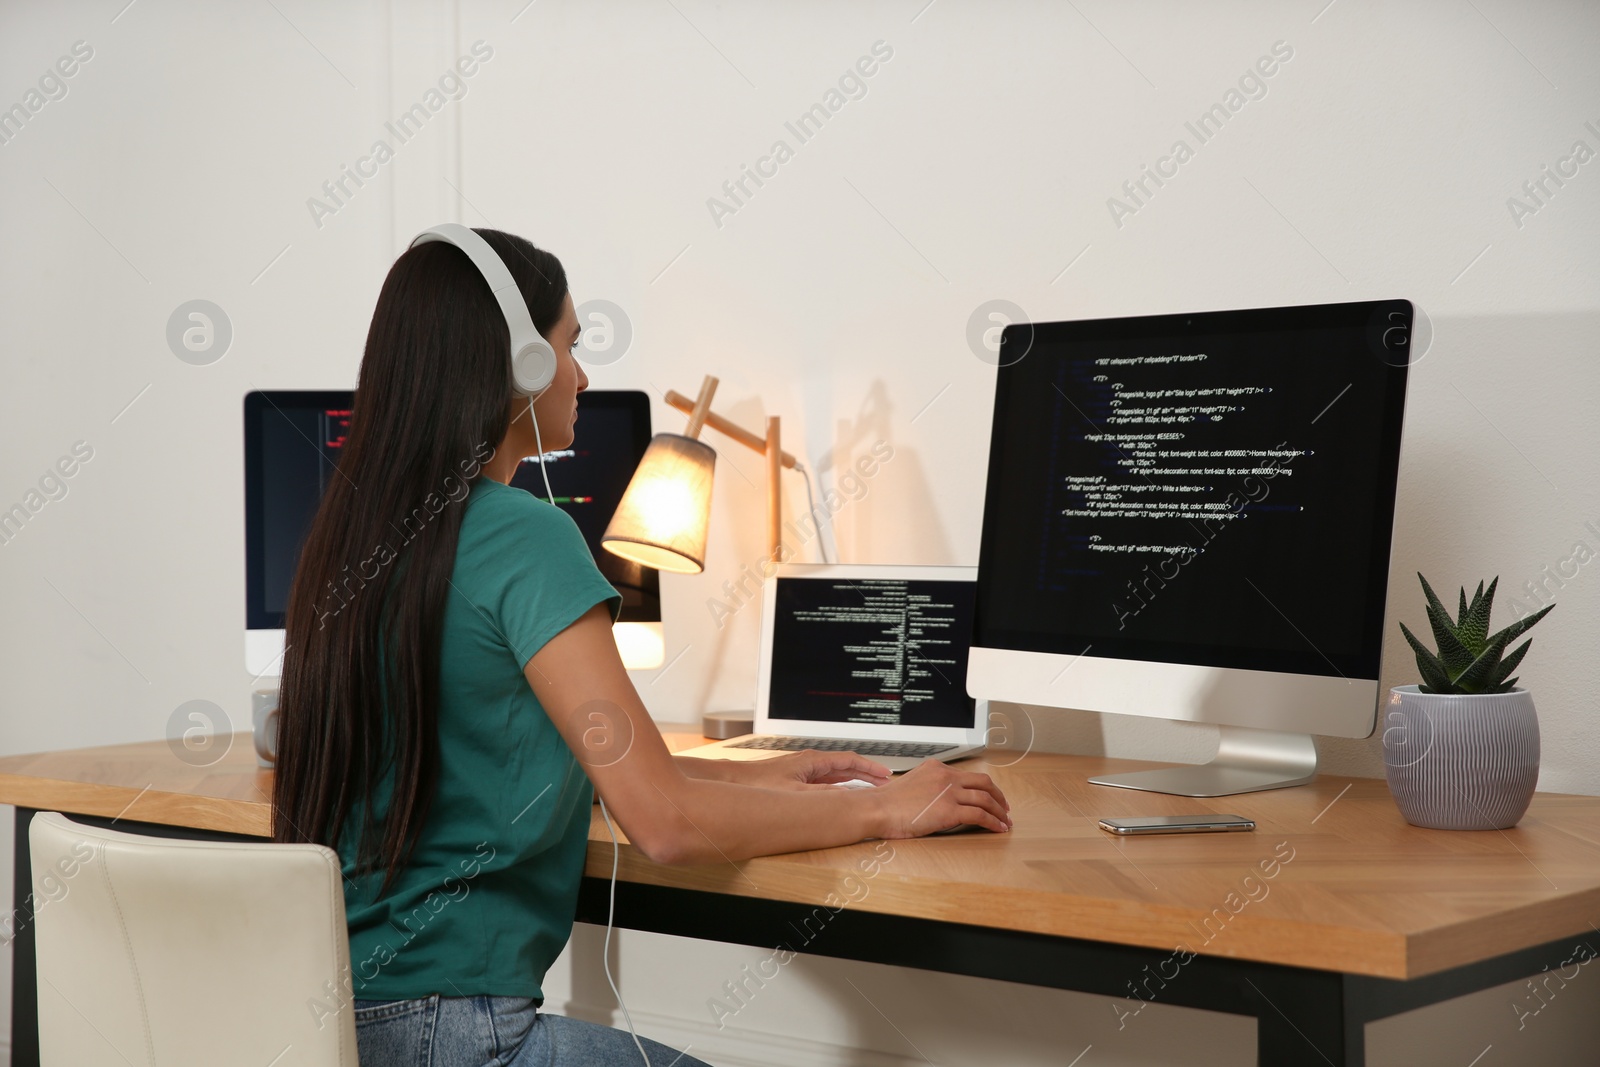 Photo of Programmer with headphones working at desk in office